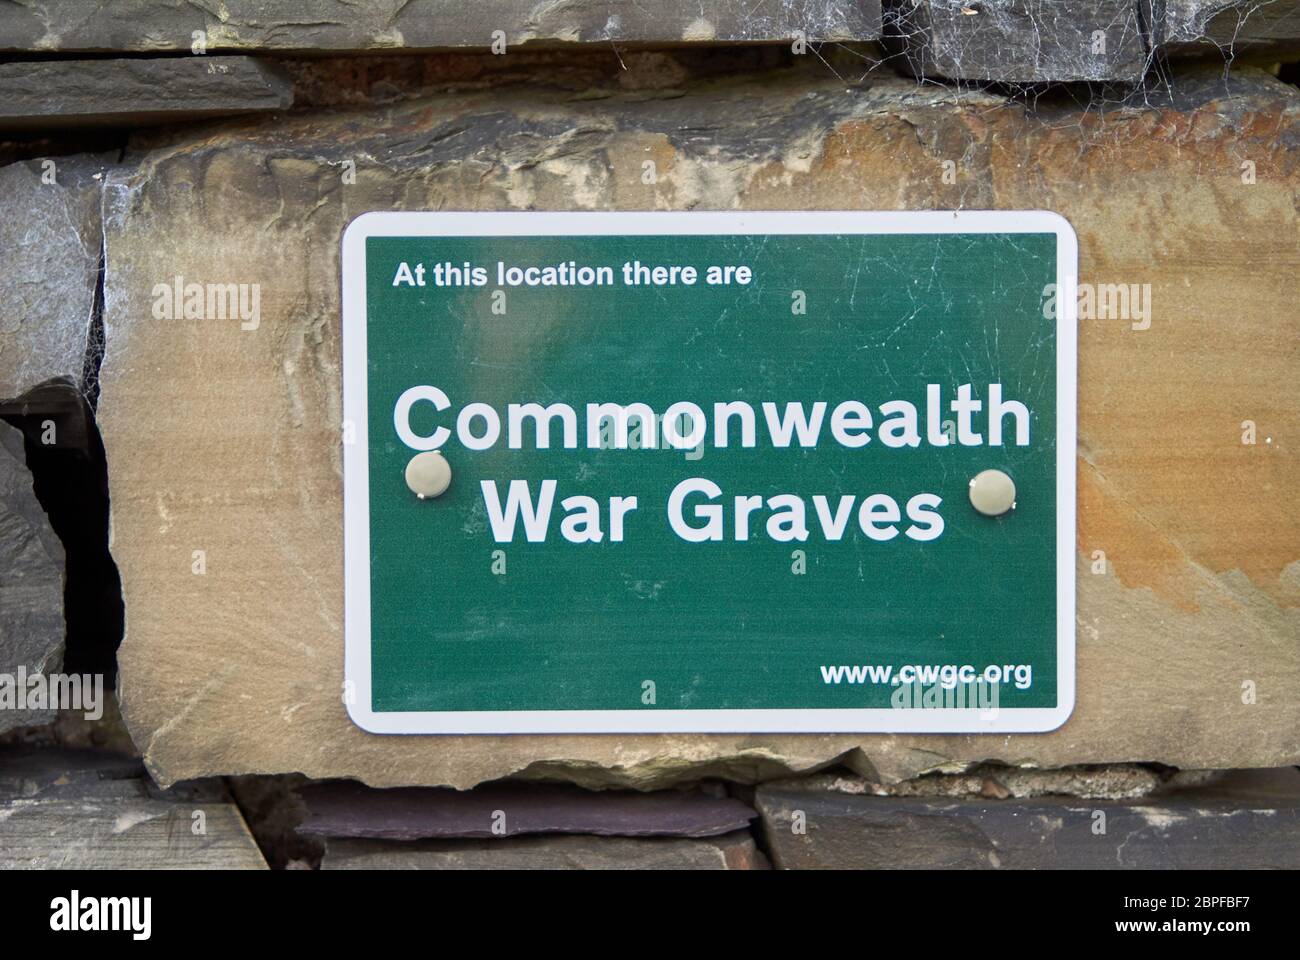 Commonwealth War Graves signage outside a church denoting burial of combatants in the church yard Stock Photo